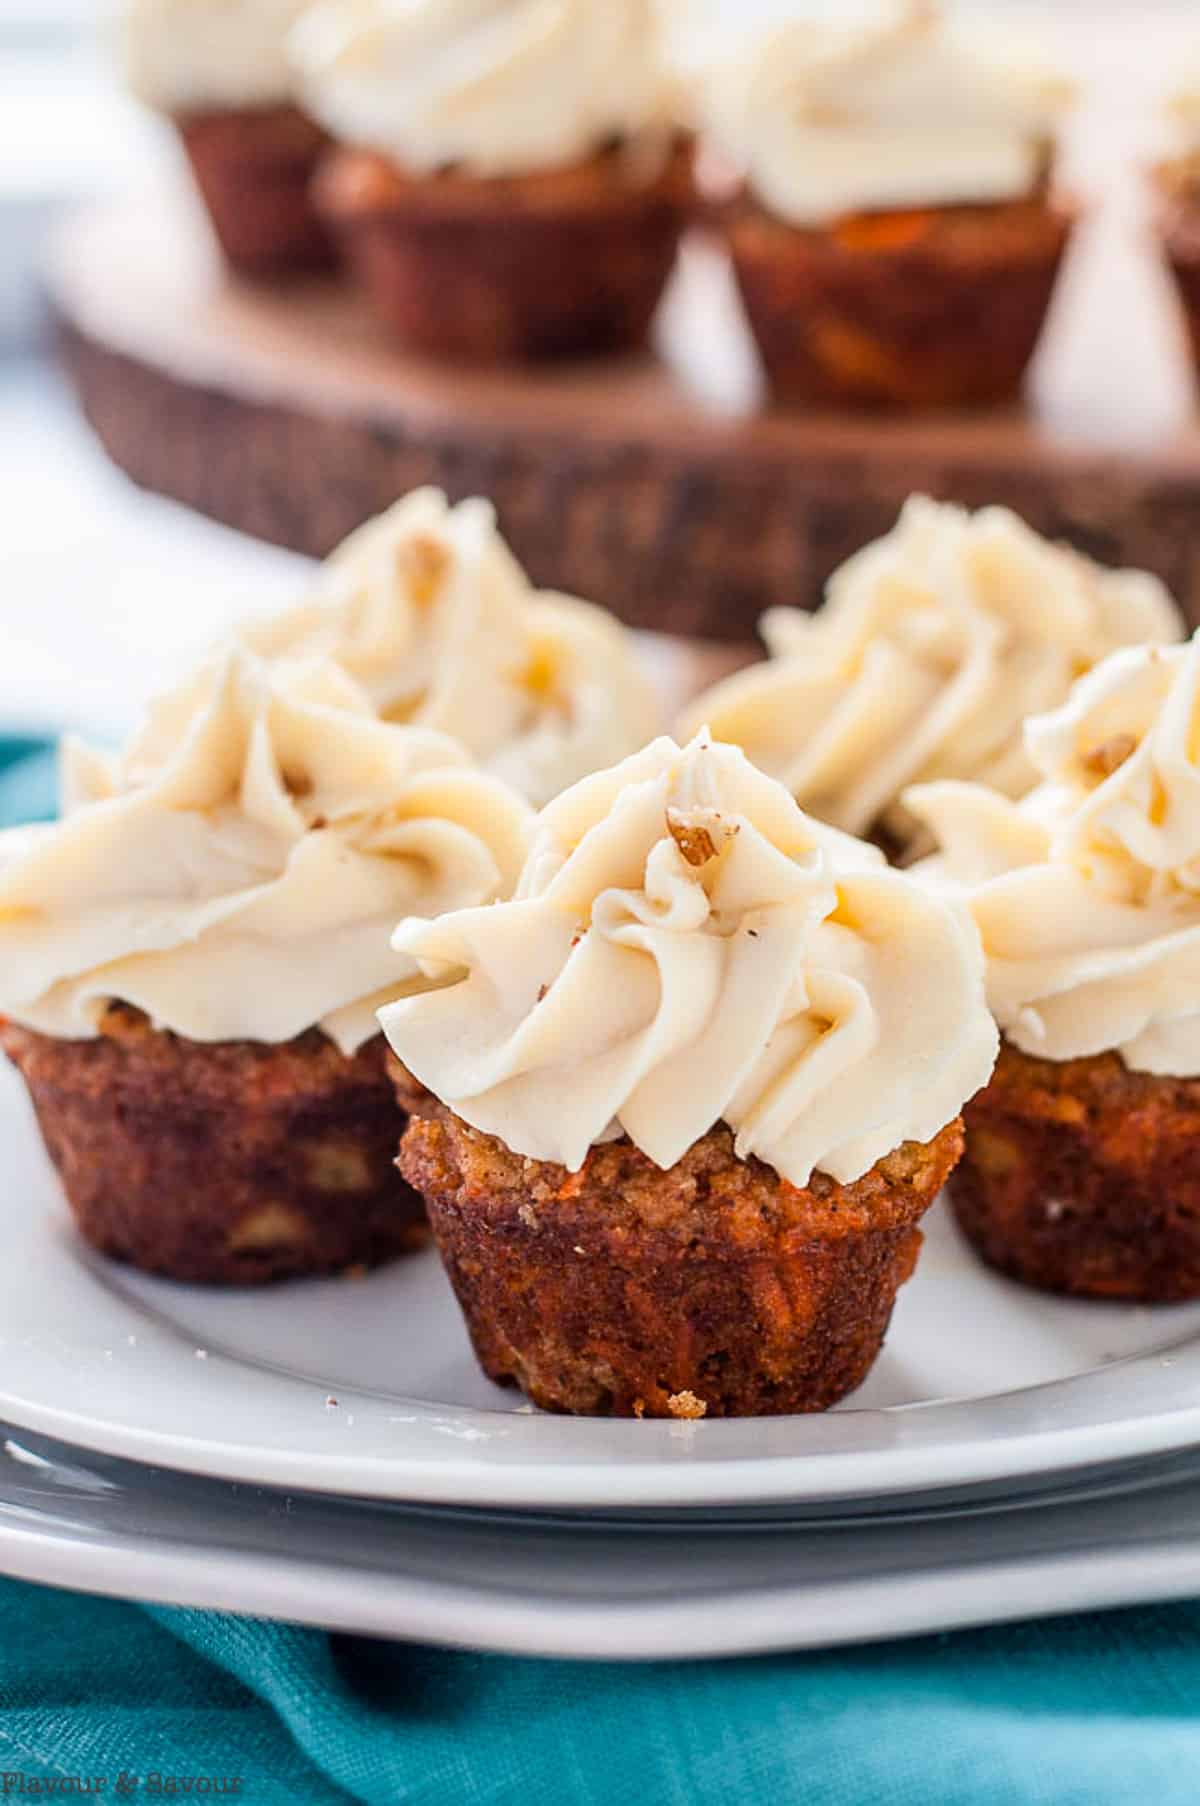 Frosted mini carrot cake cupcakes on a plate.